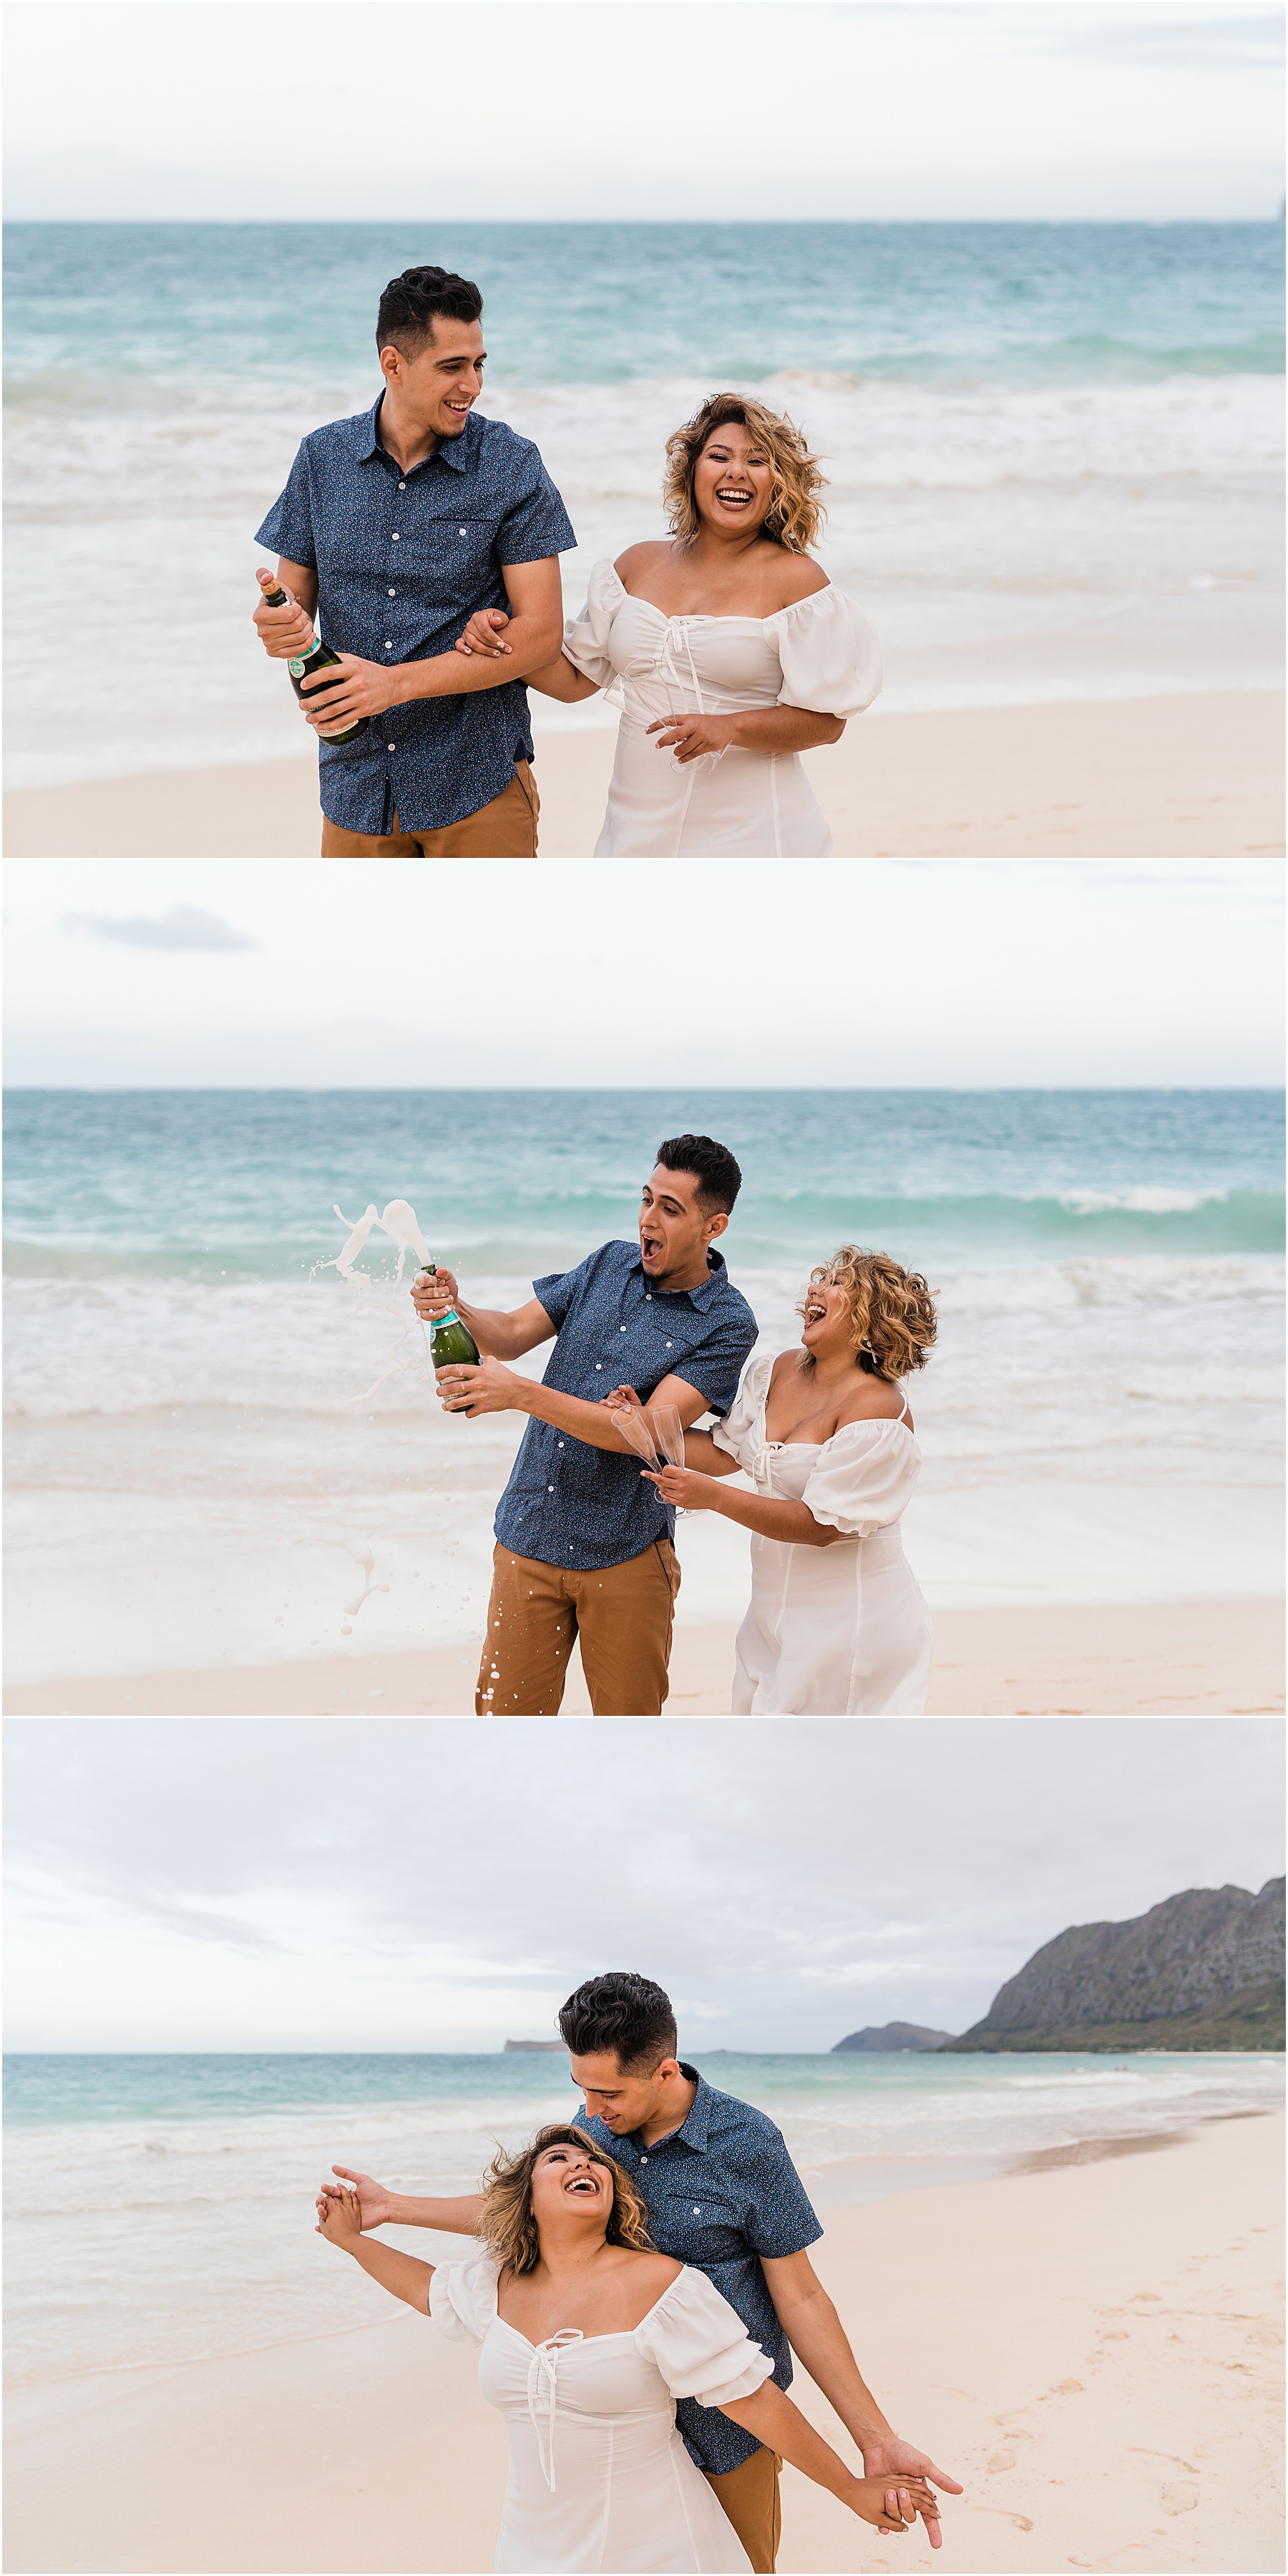 Couple popping champagne celebrating anniversary in Hawaii